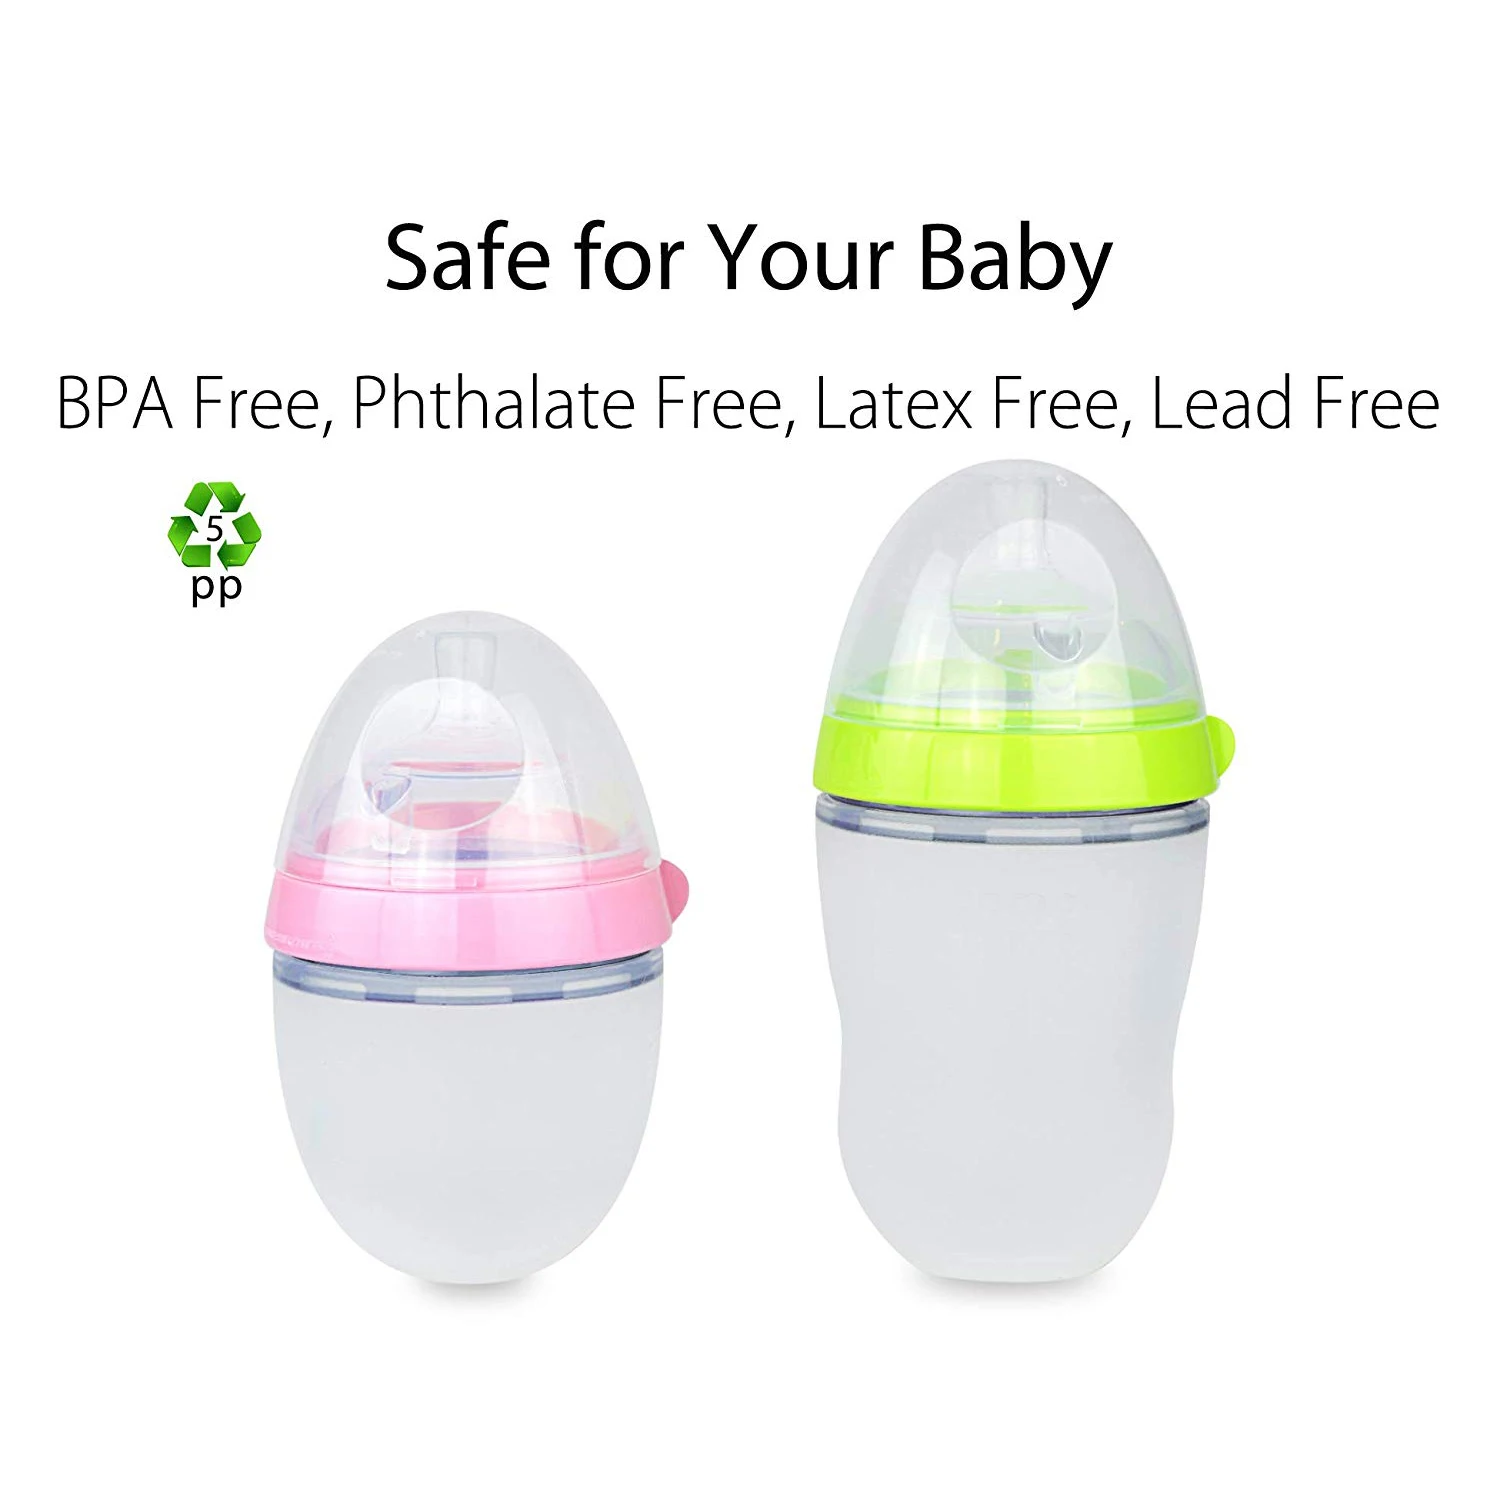 2 Pack Feeding Bottle Caps and Collars Compatible for Comotomo,Pink